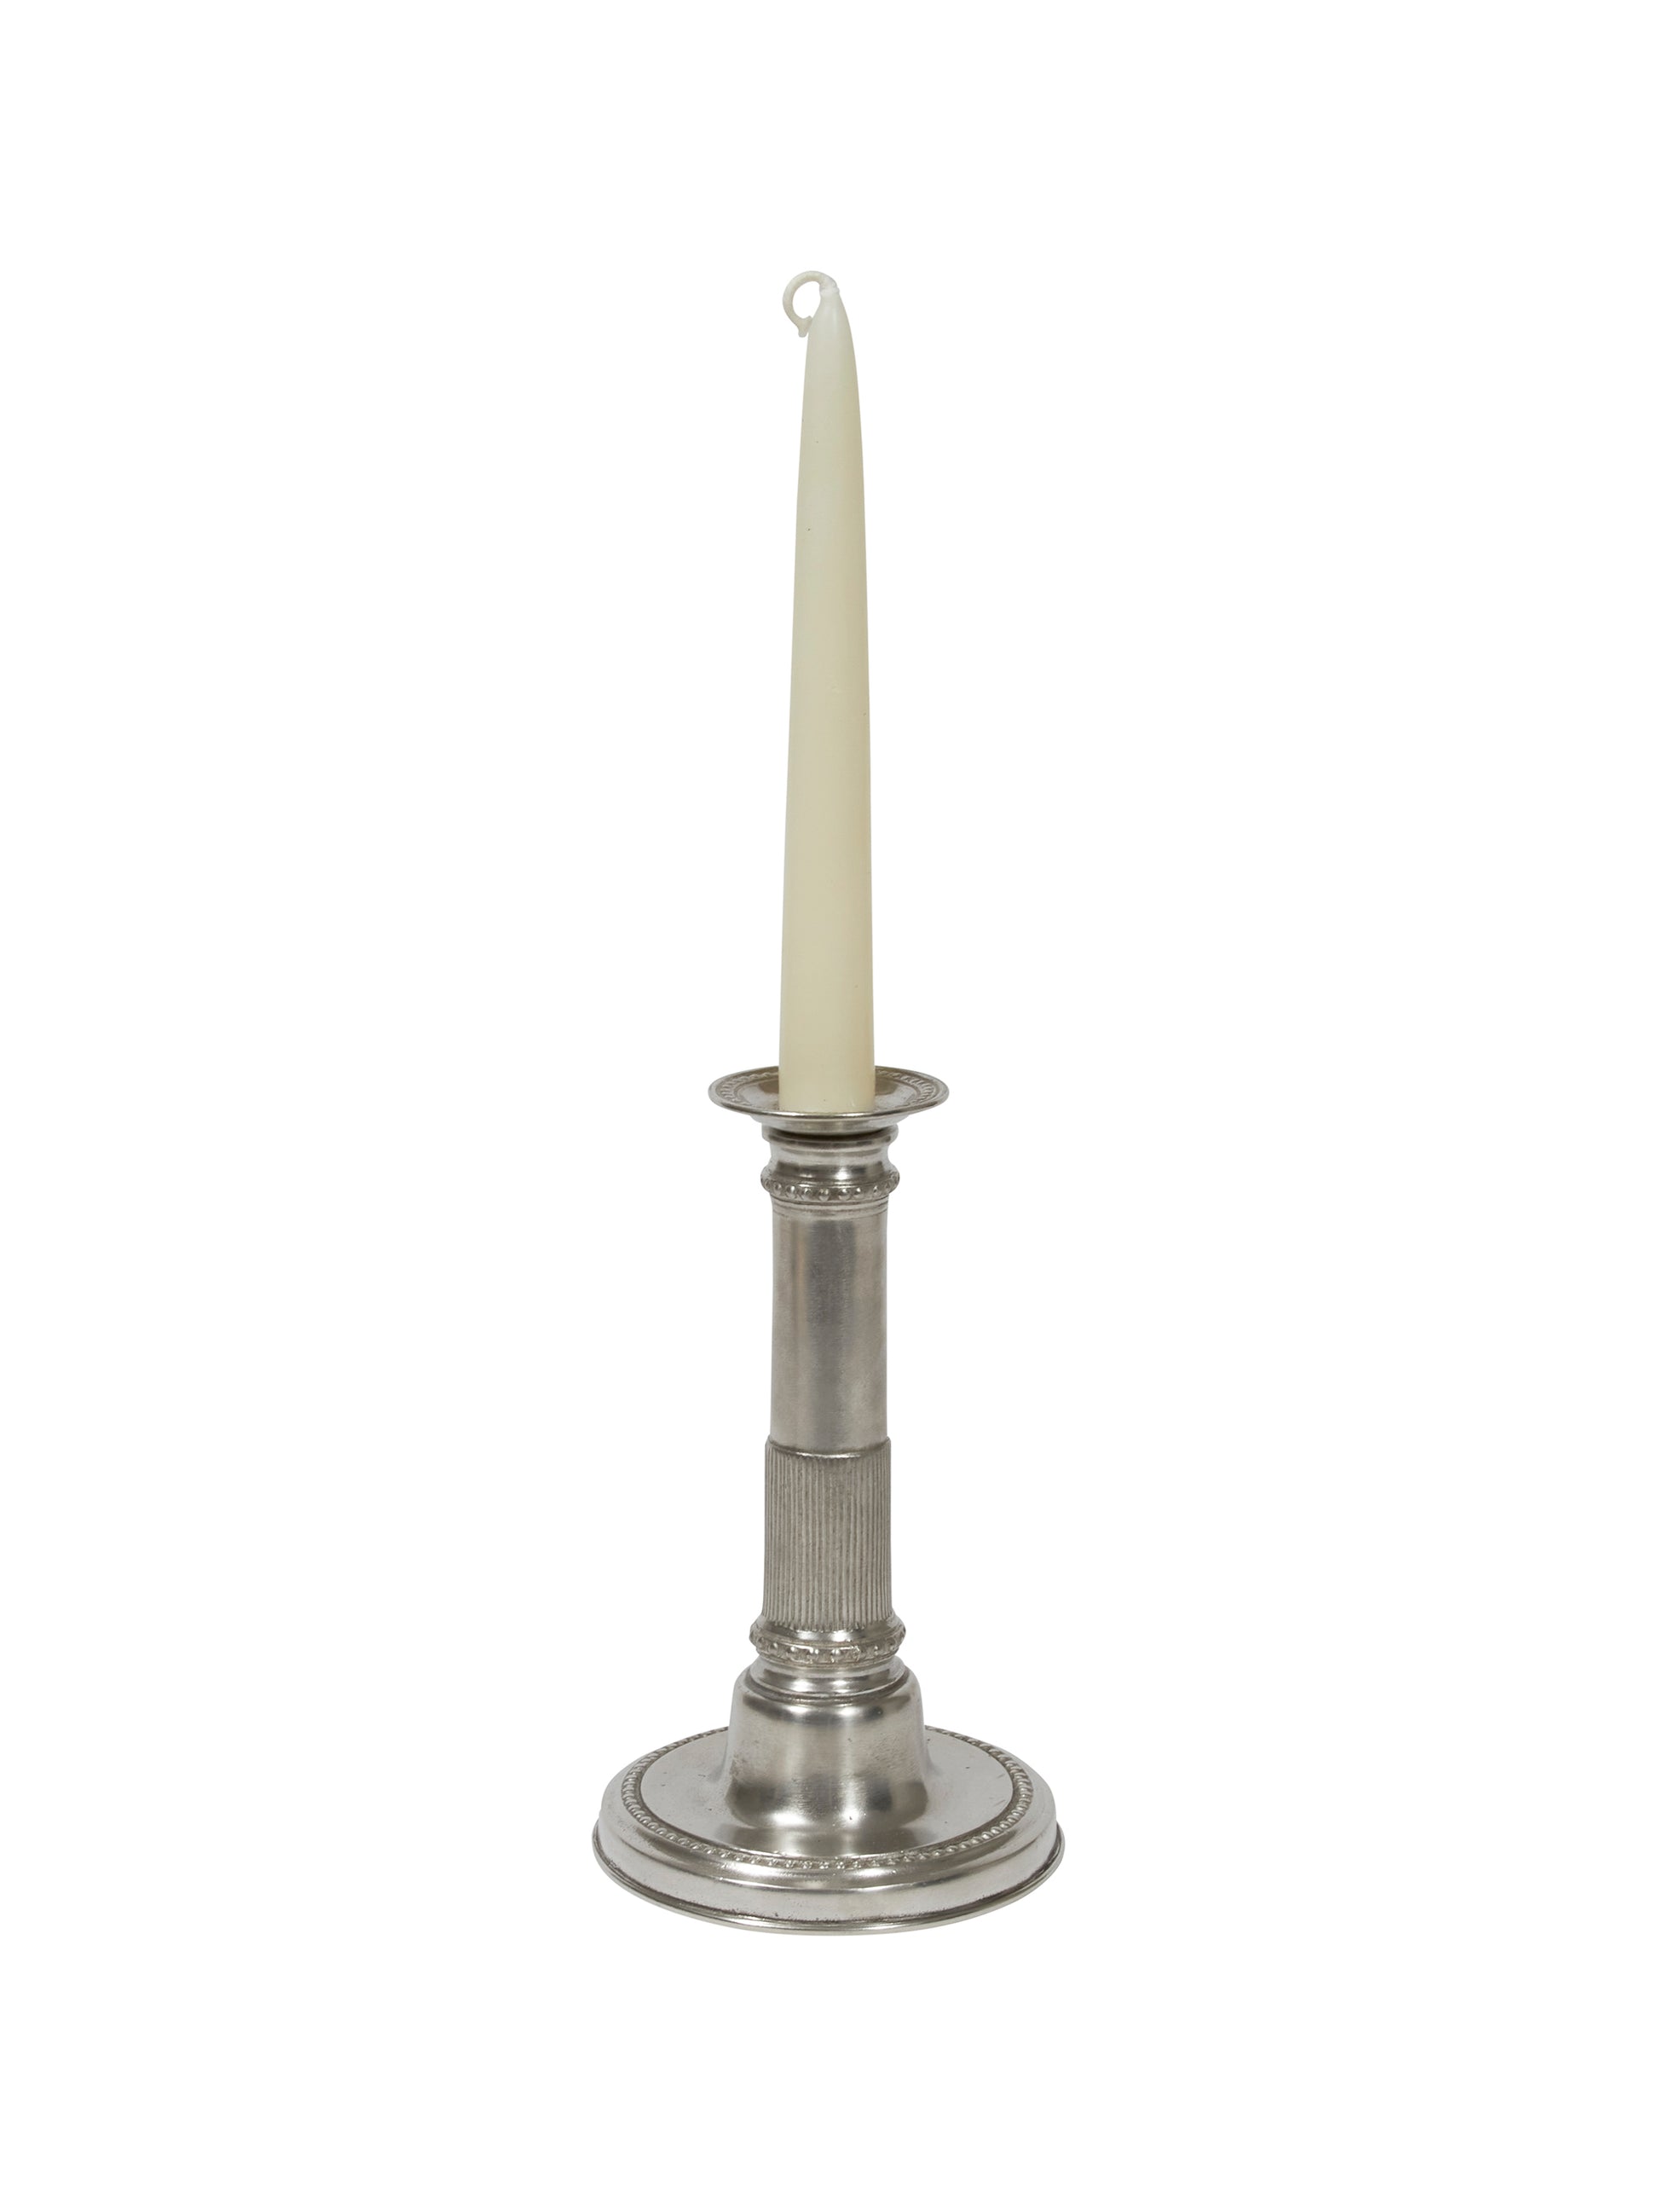 MATCH Pewter Round Based Candlestick Weston Table